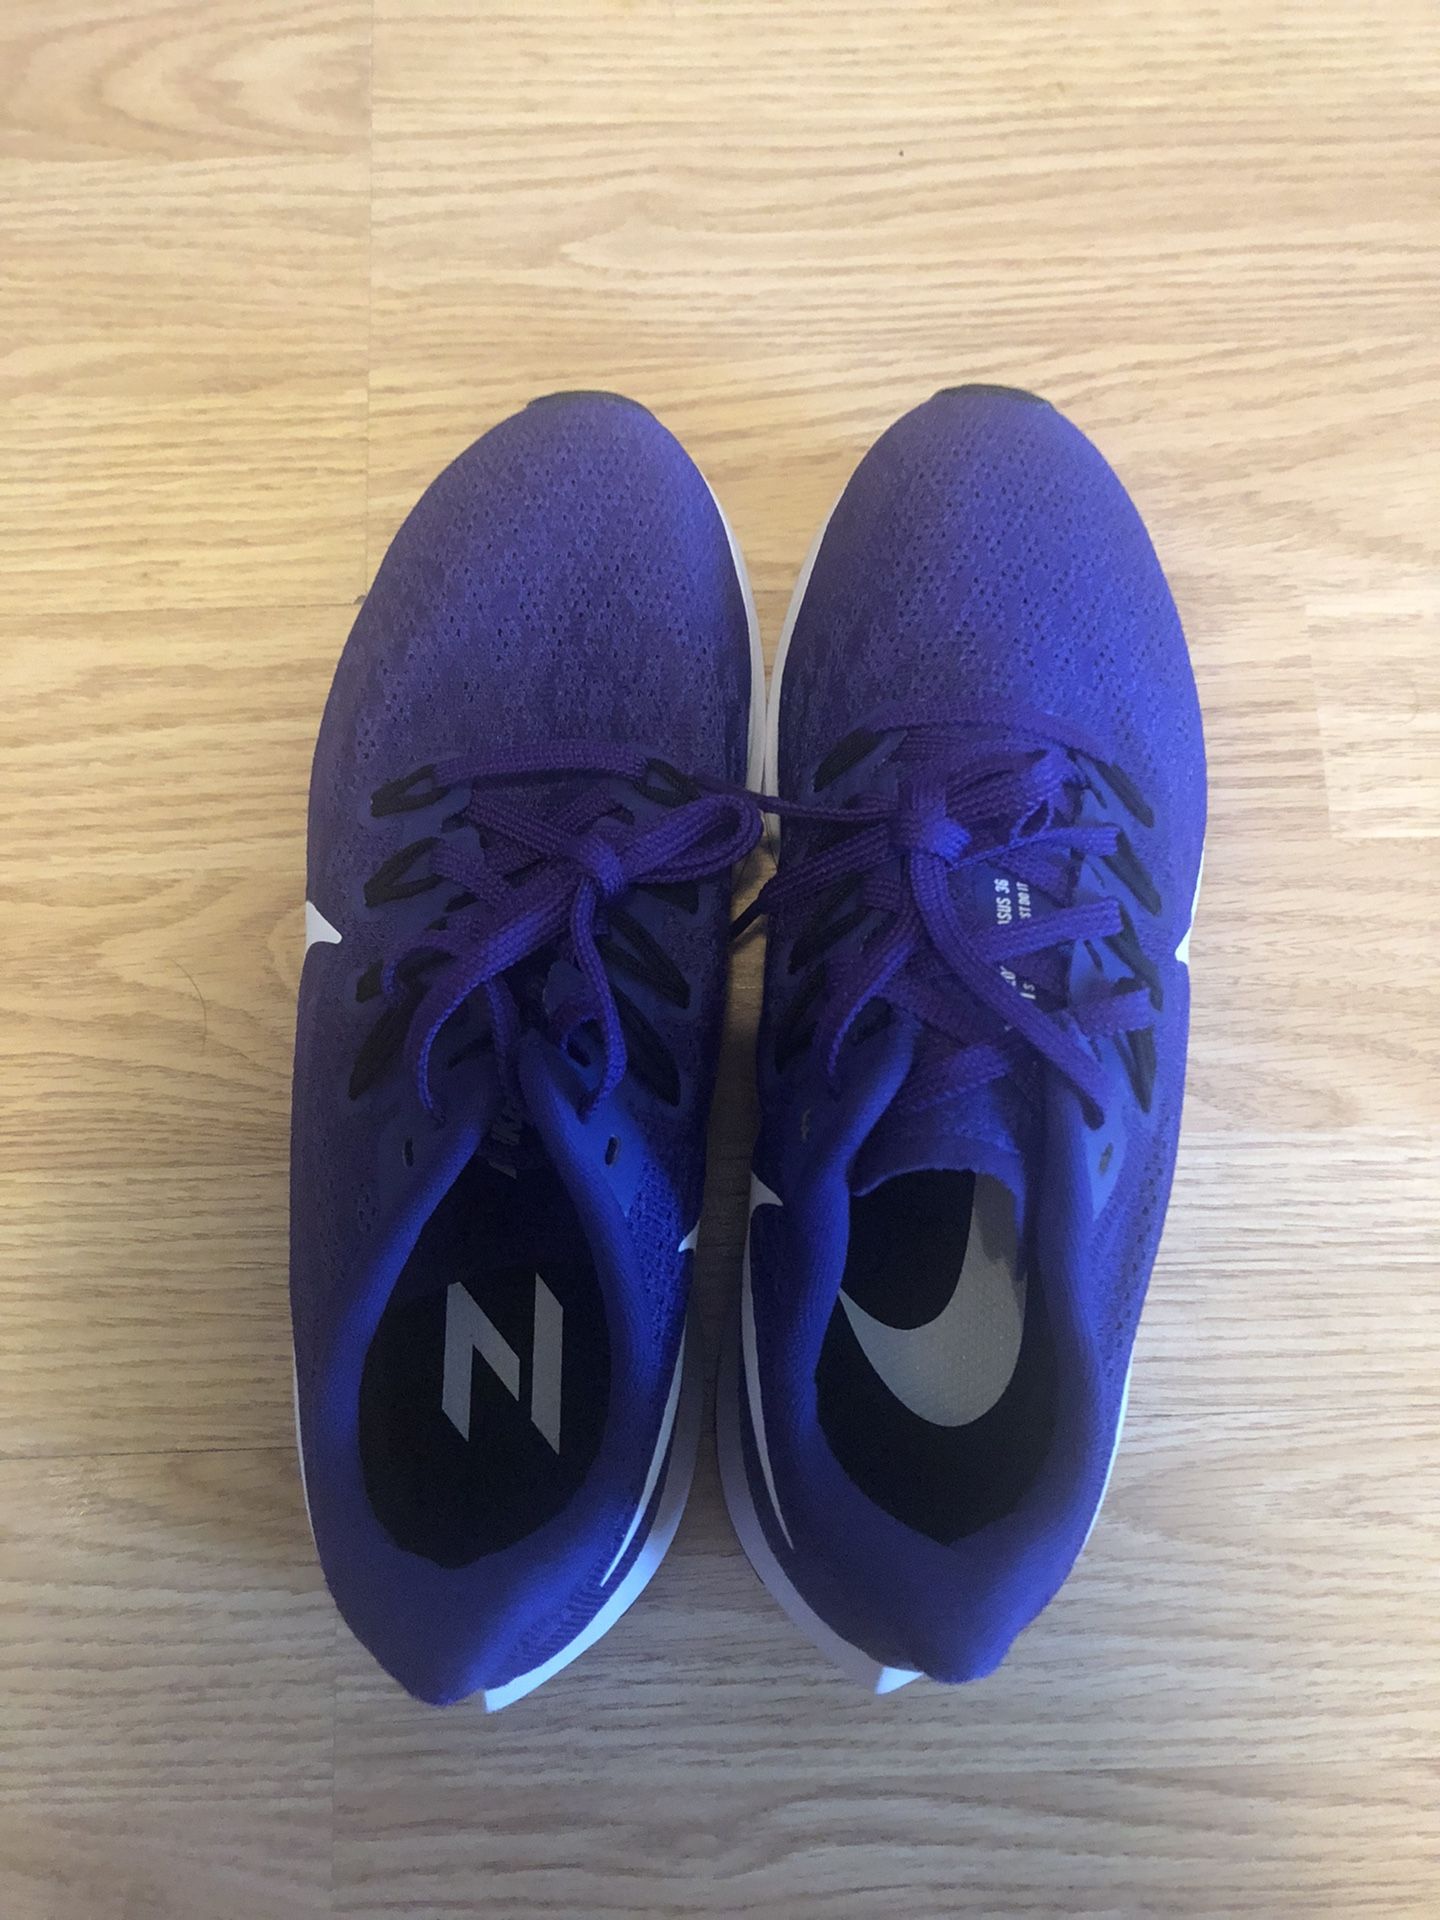 Women’s New Nike Zoom Shoes Size 7